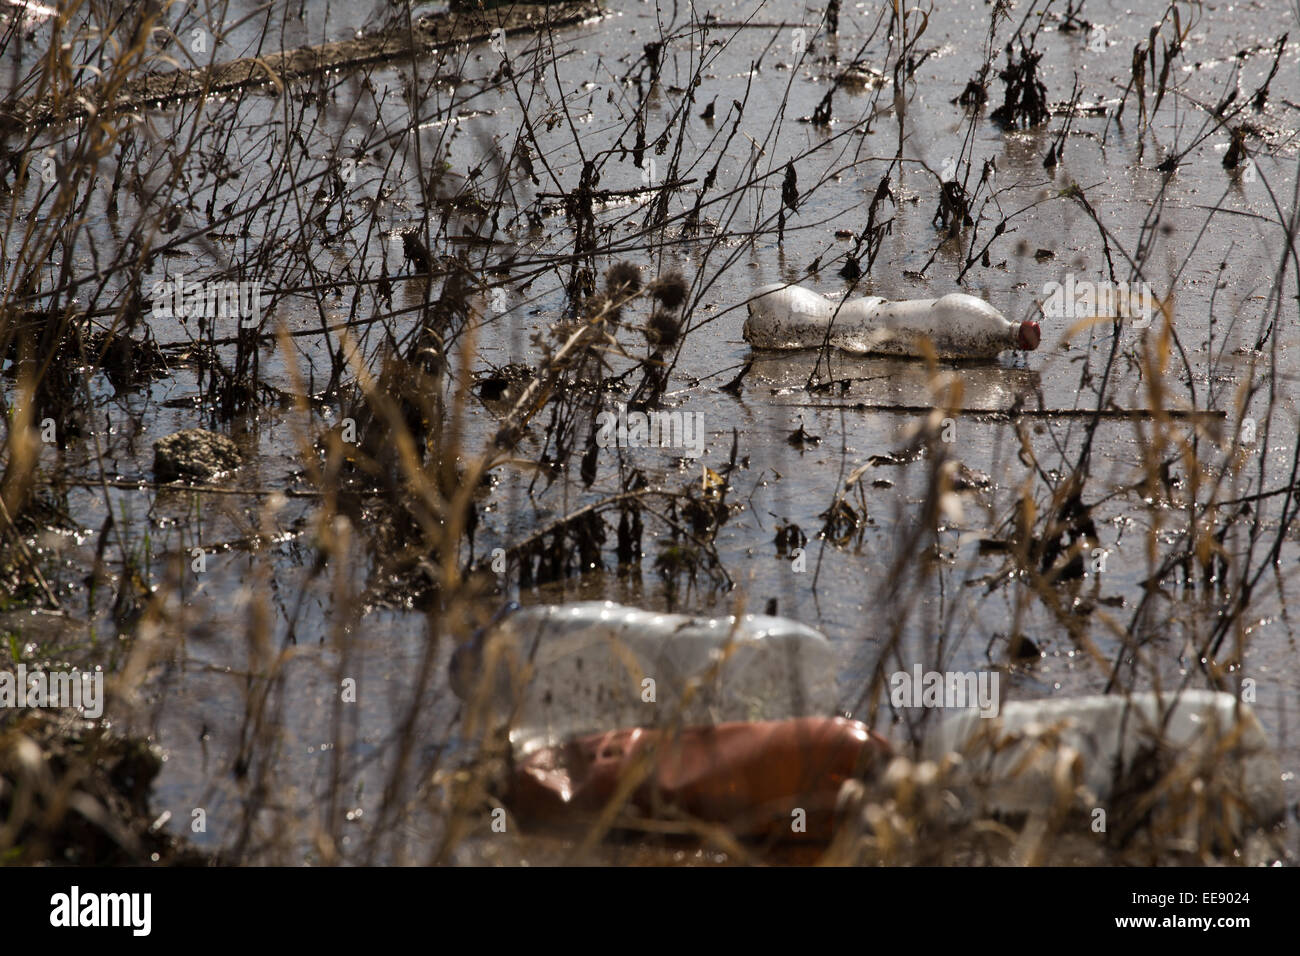 Bottles and trash in the river Stock Photo